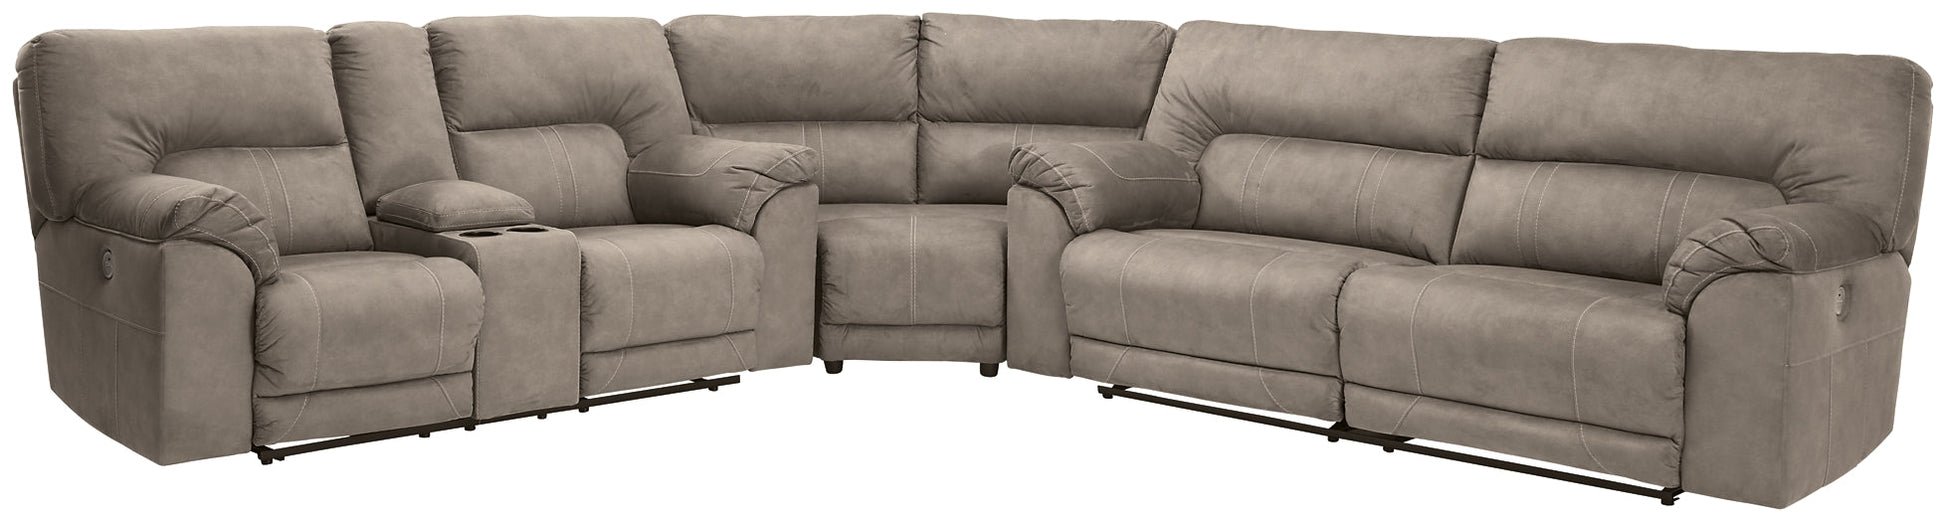 Cavalcade 3-Piece Power Reclining Sectional Smyrna Furniture Outlet